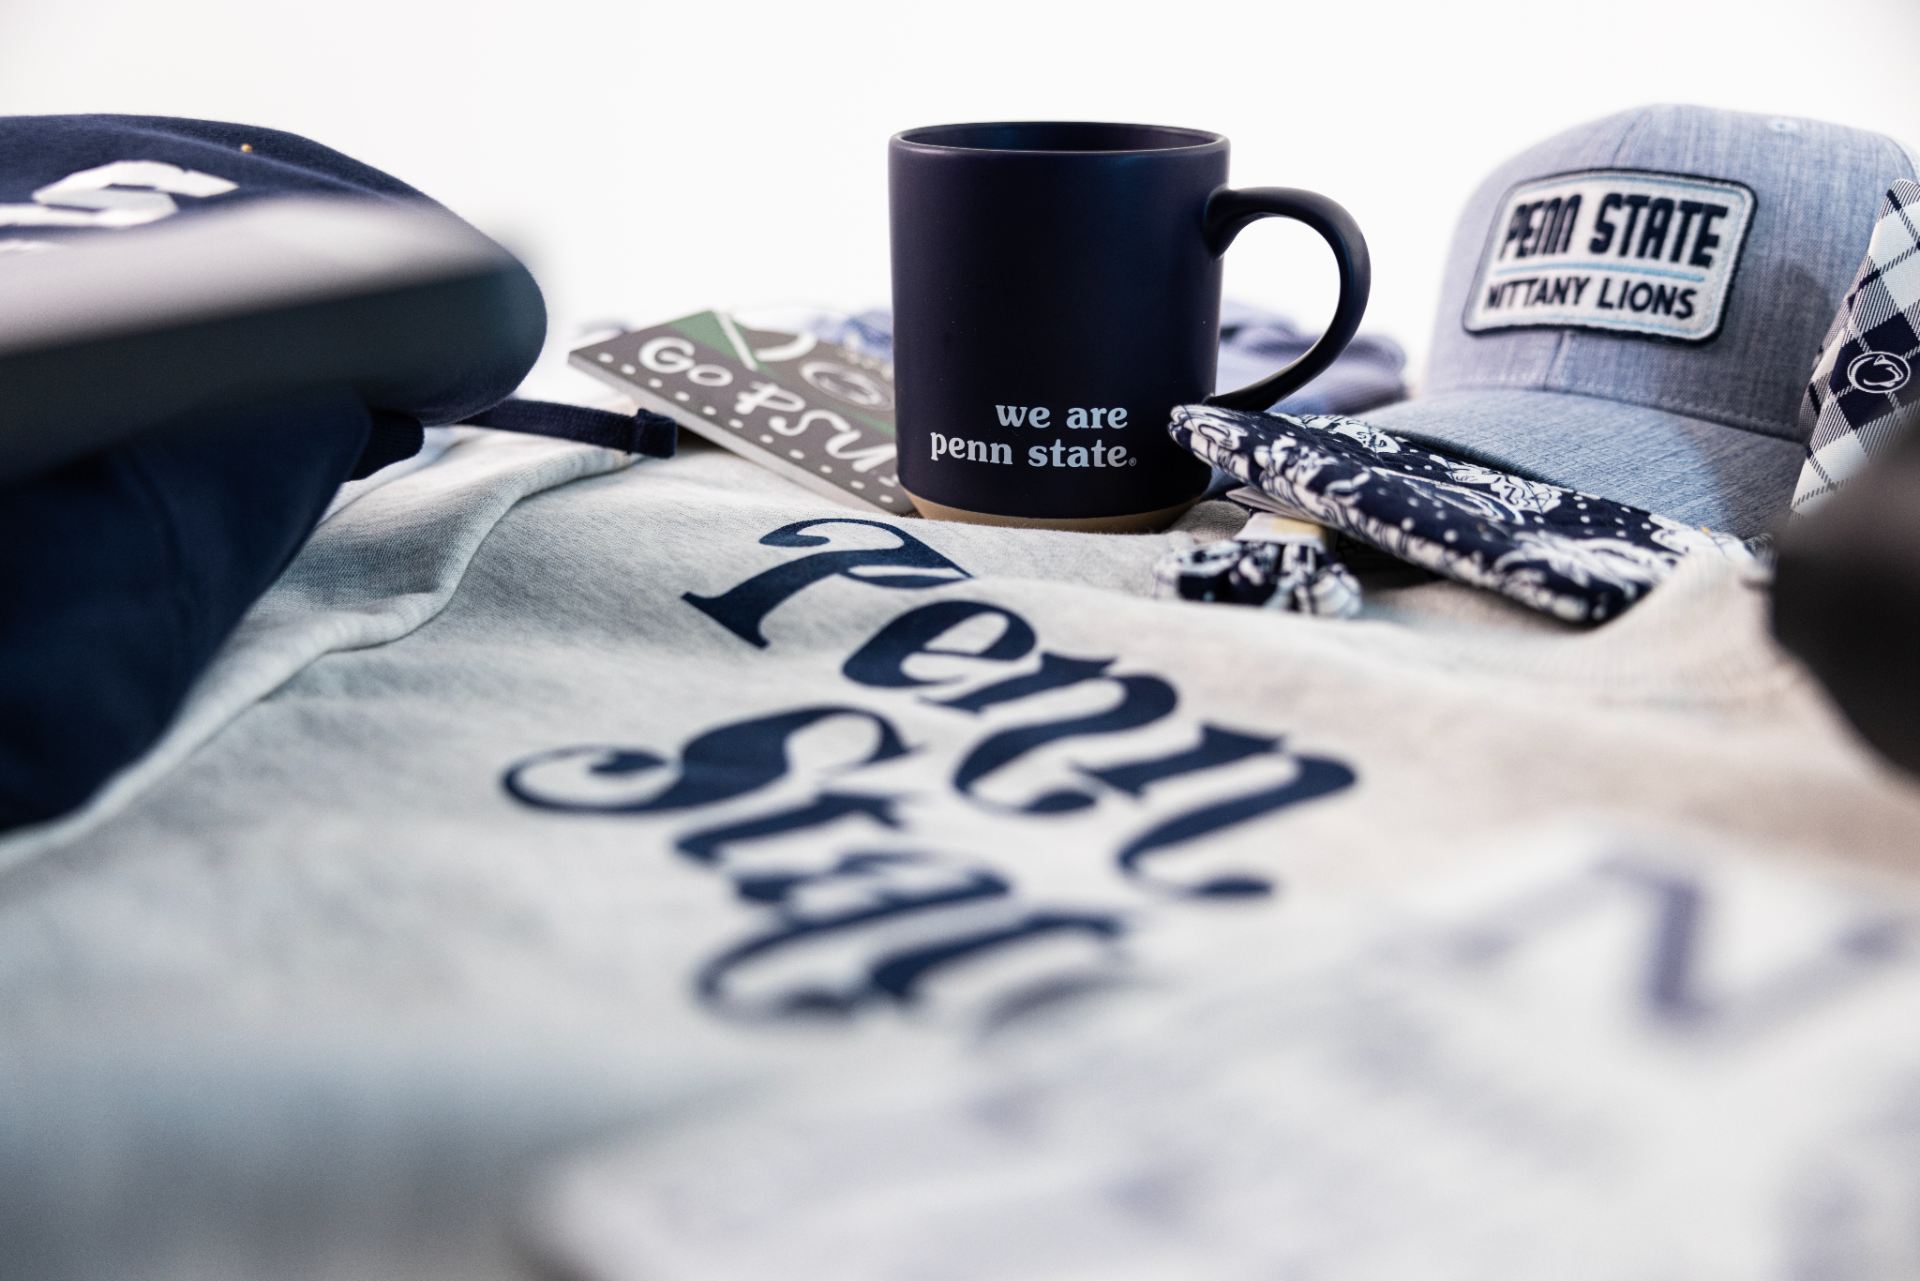 Assorted Penn State merchandise, including a t-shirt, a mug, a hat, and stickers